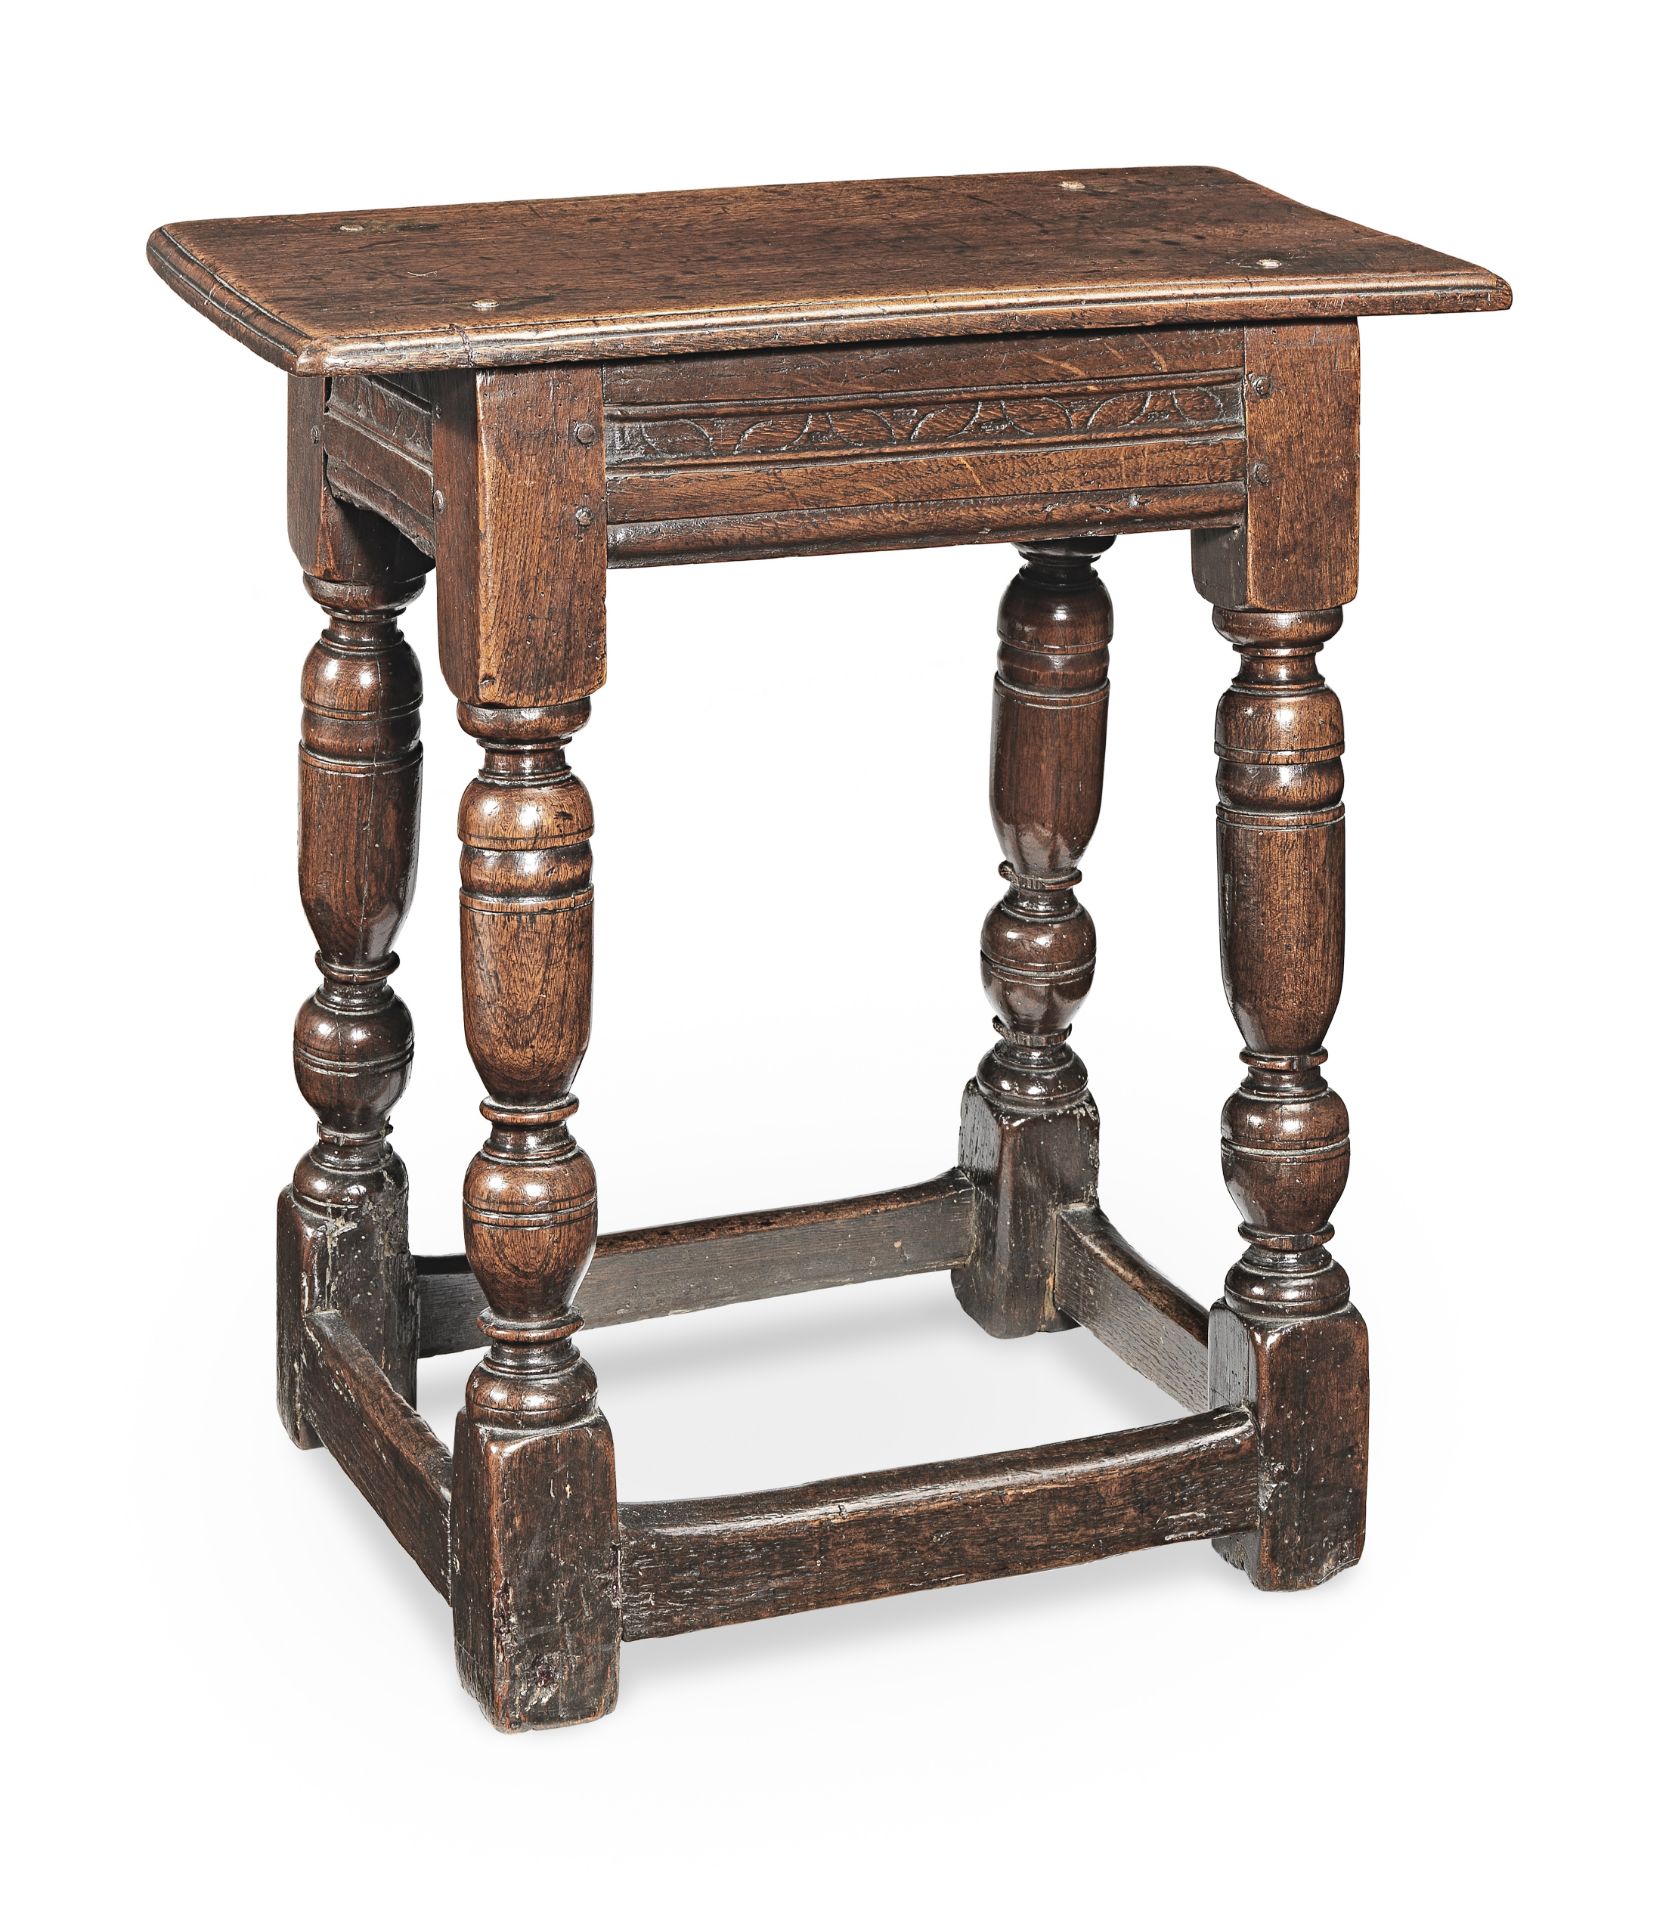 A Charles I oak and elm joint stool, circa 1630